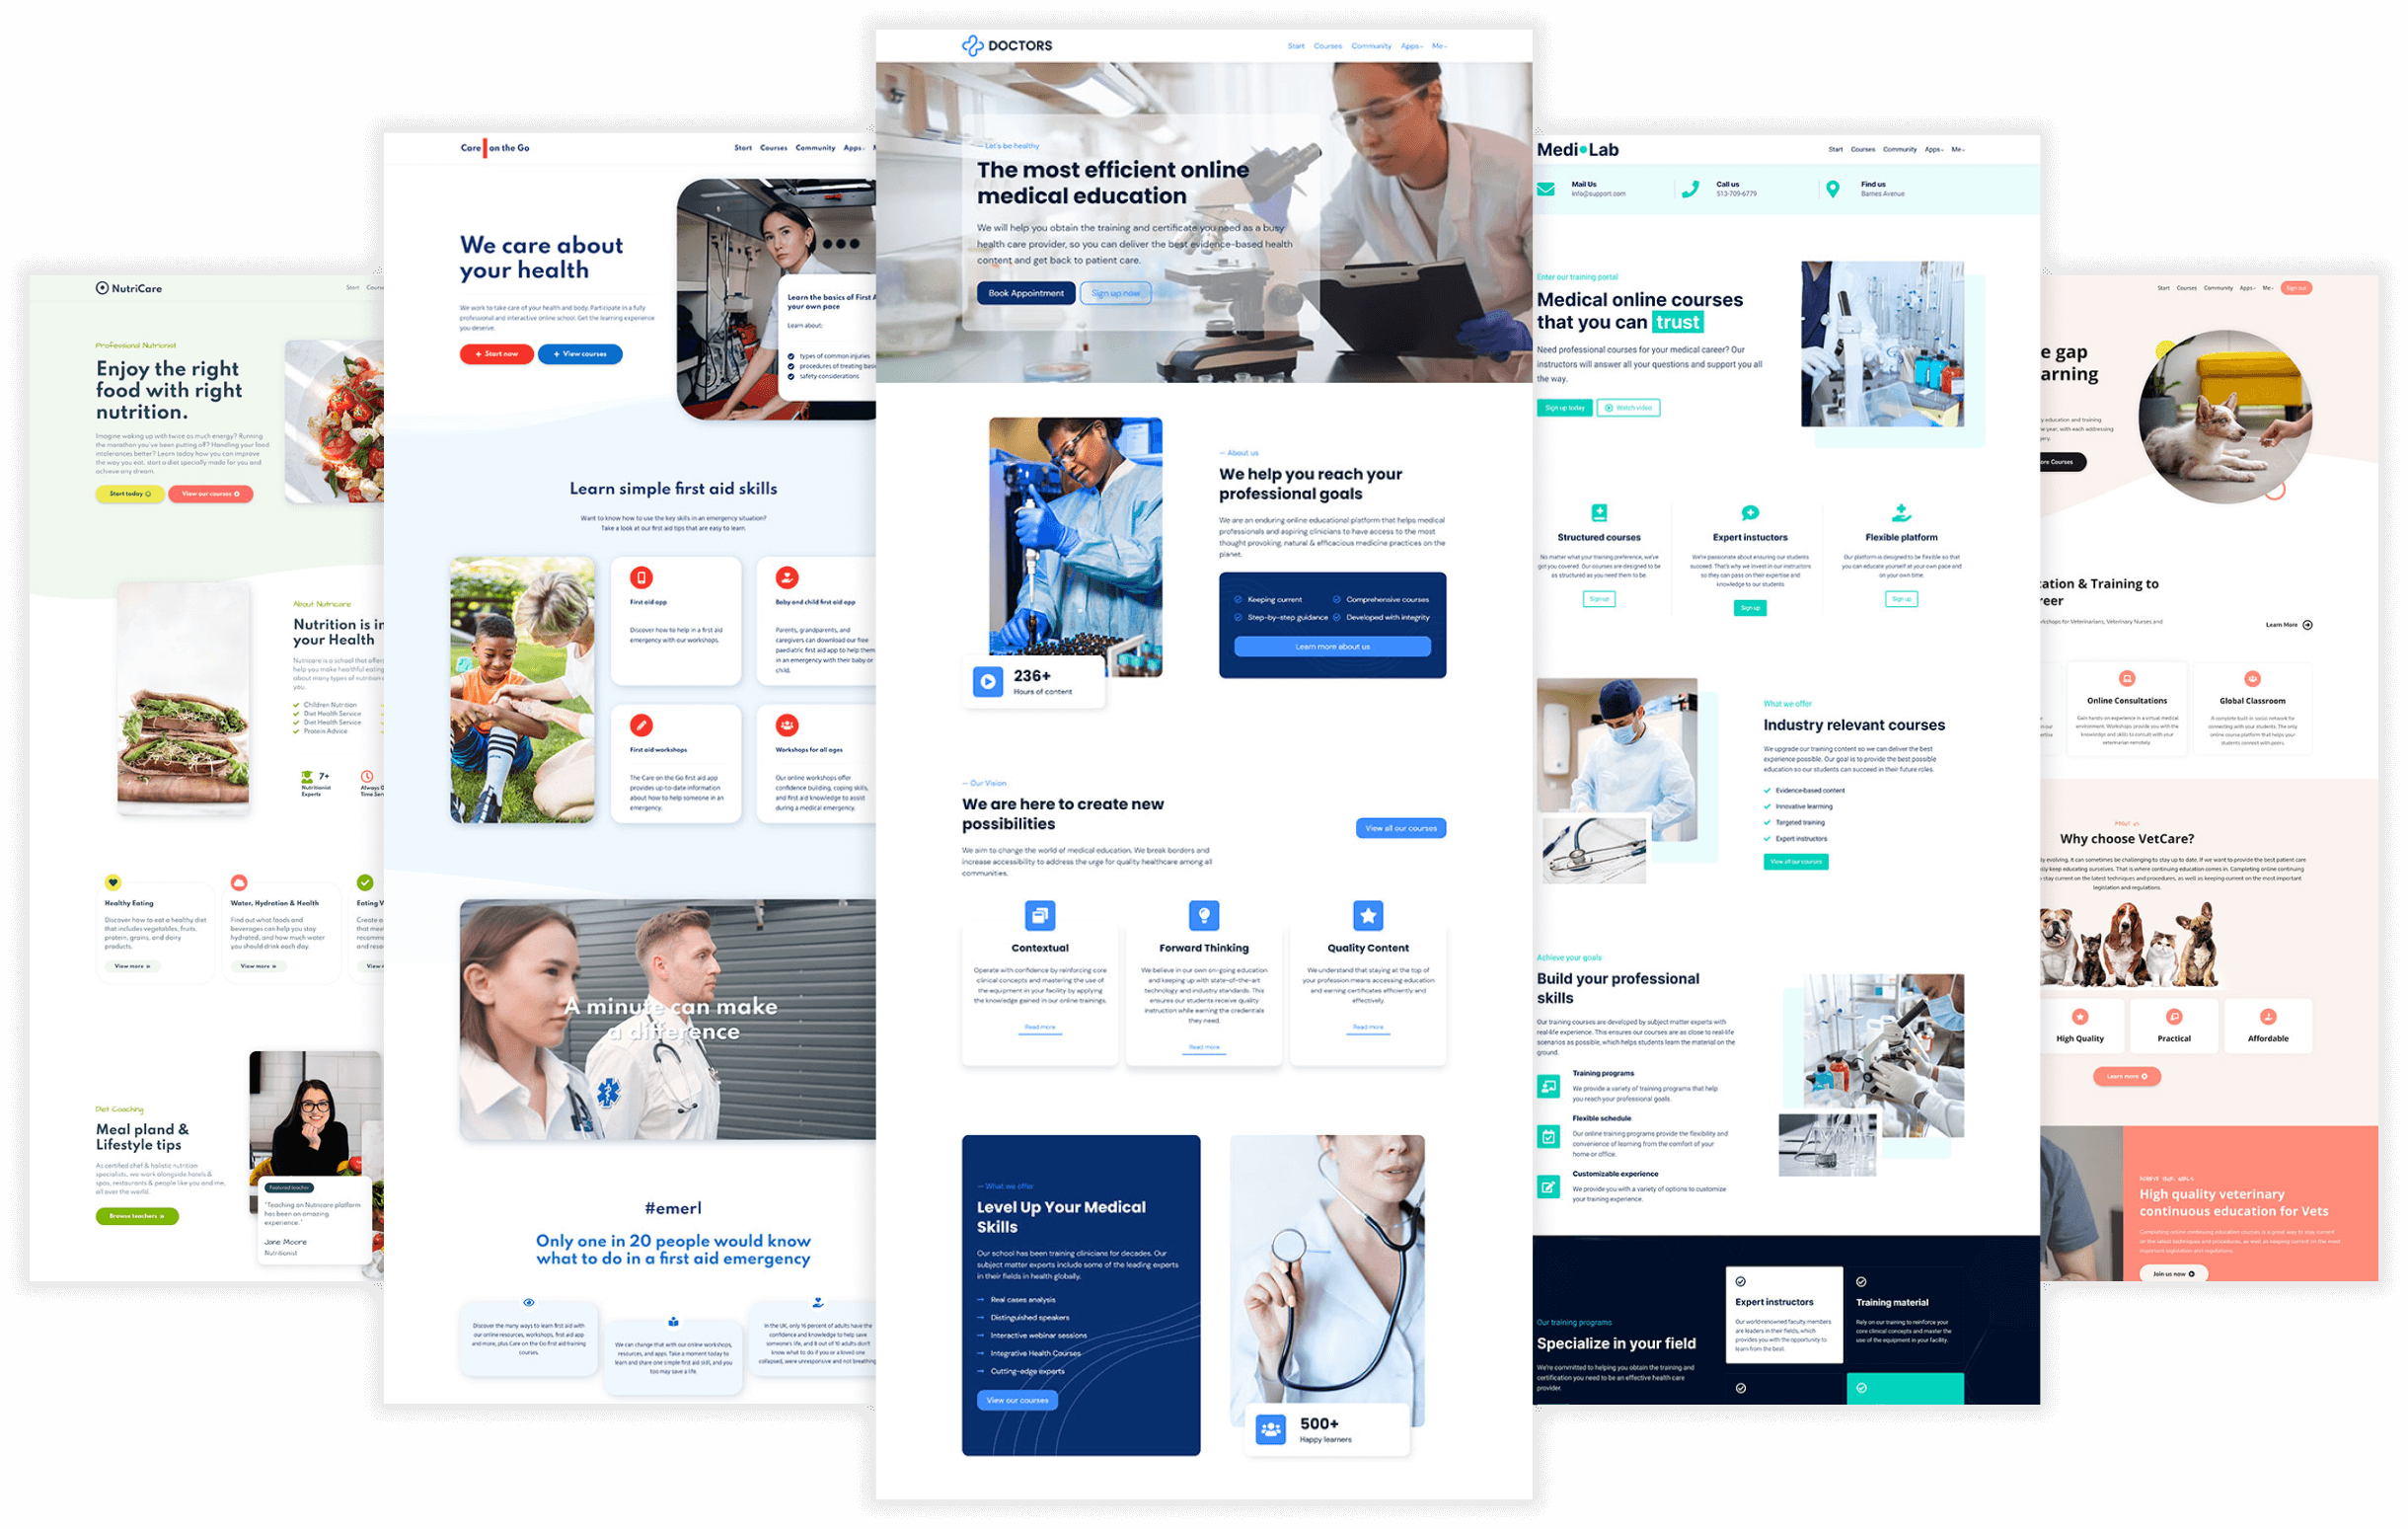 Showcasing the medical website templates of LearnWorlds. Selling medical education and patient education services through your own website.